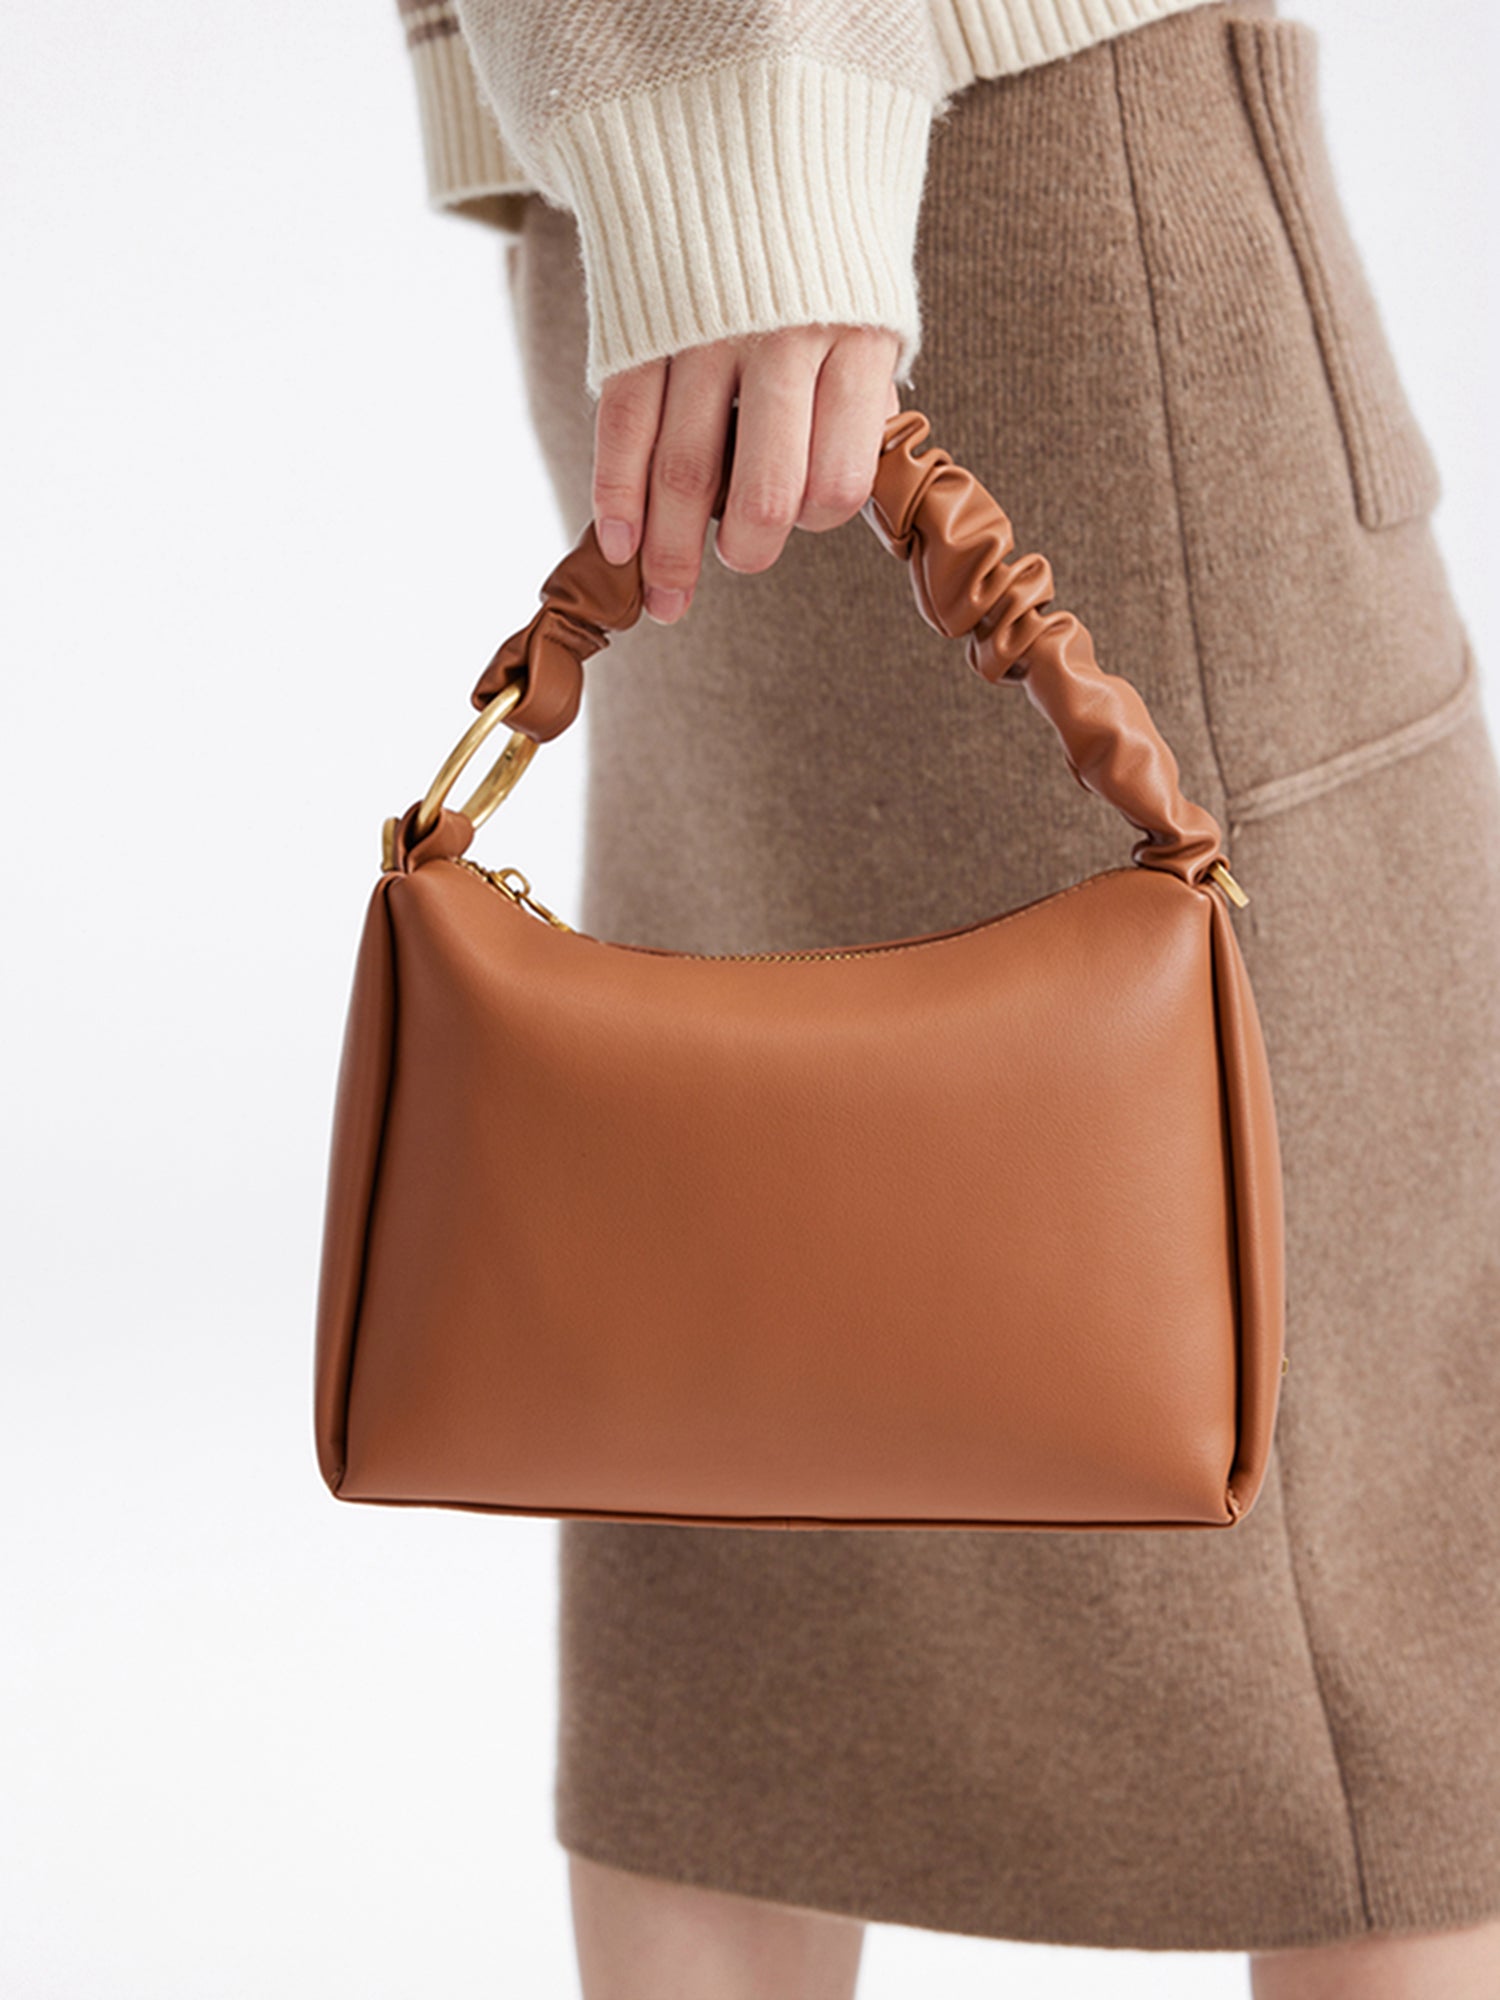 My Favourite Earth Tone Bag Collection ✨, Gallery posted by Yann